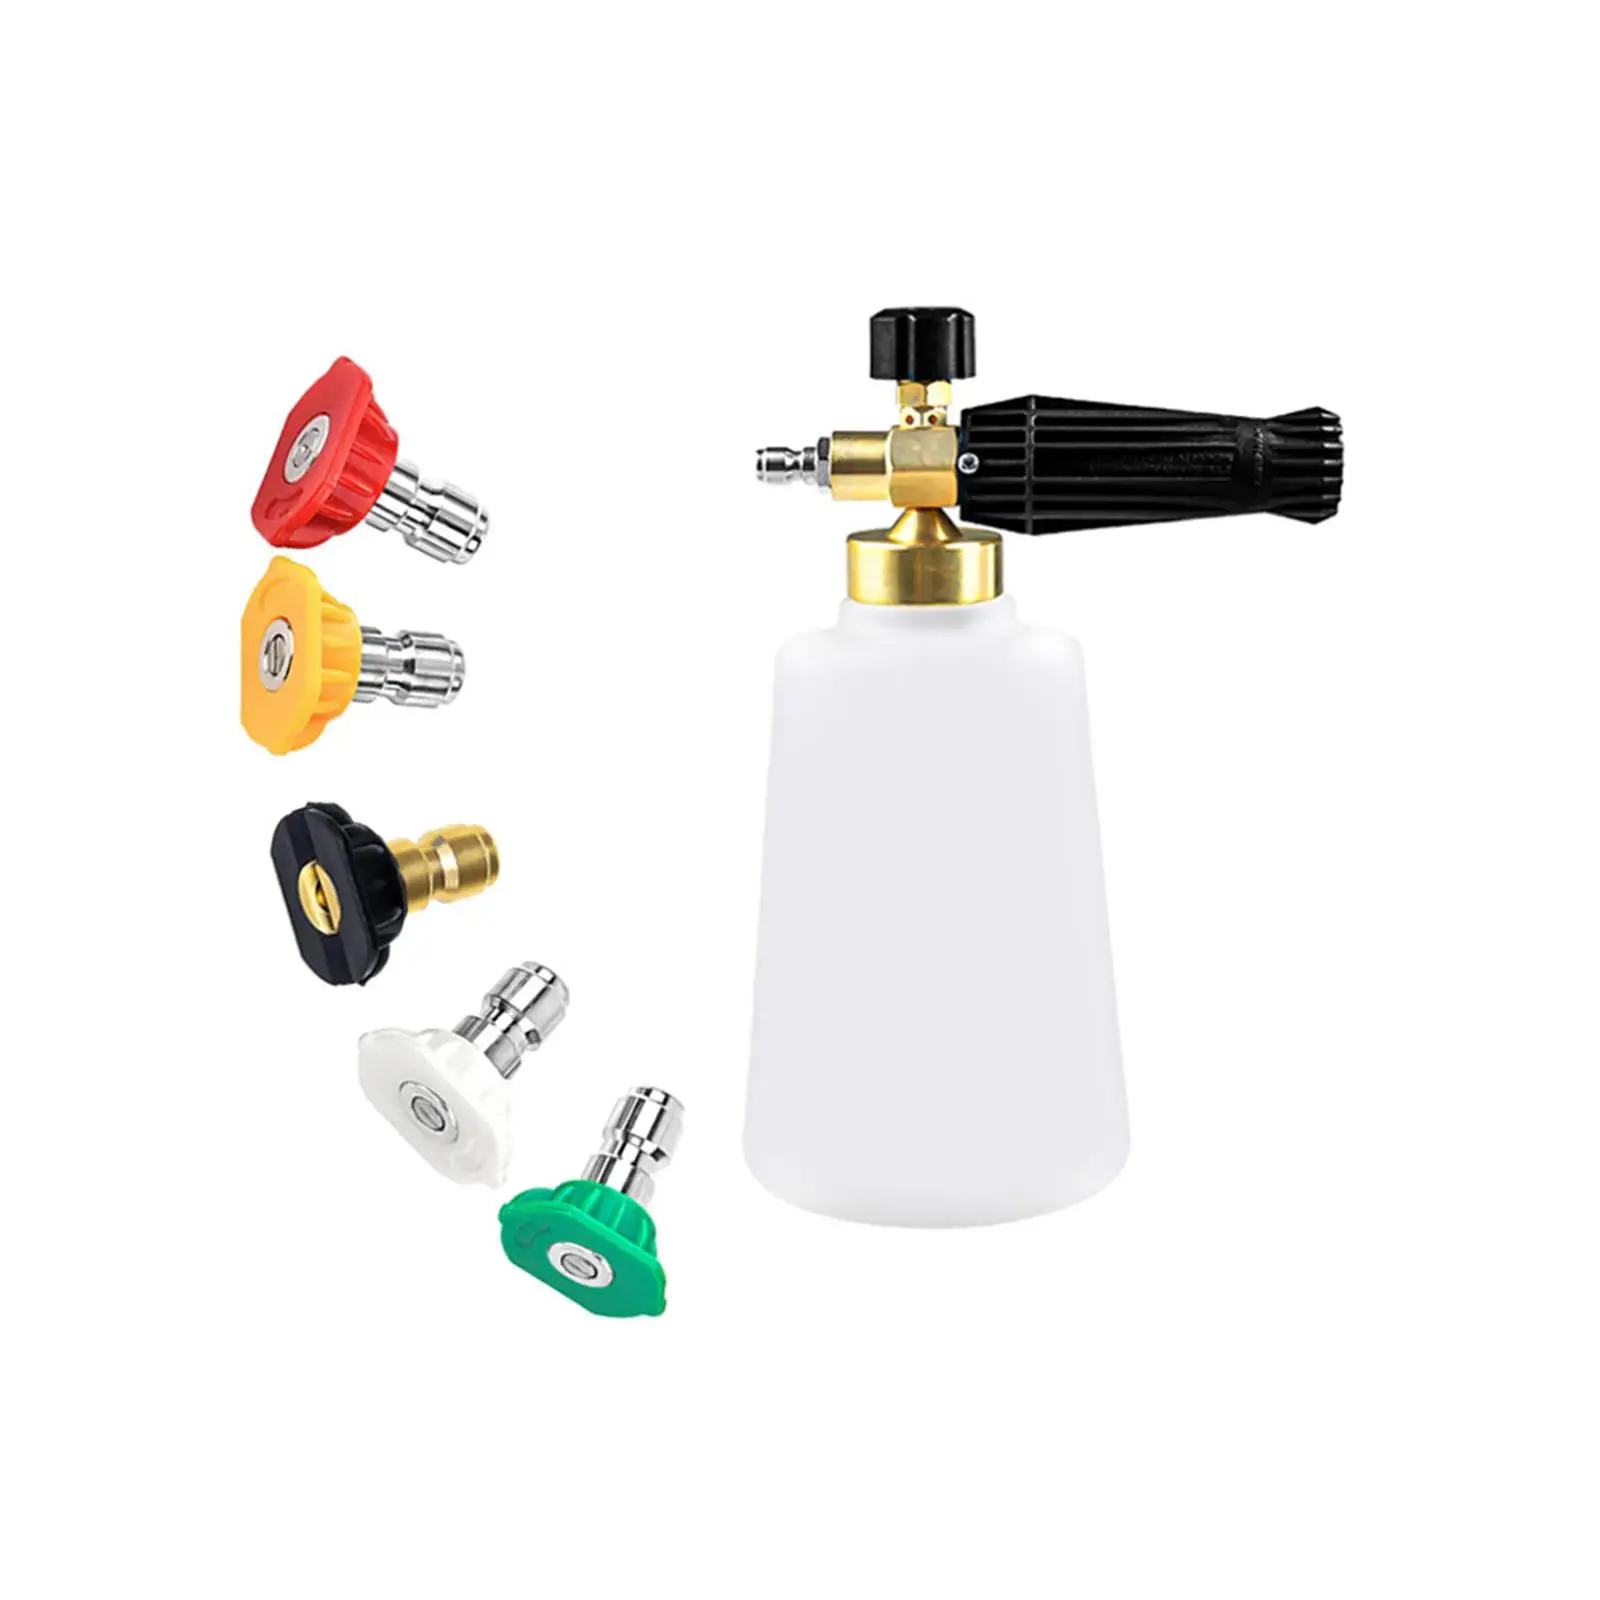 Foam Sprayer 5 Pressure Washer Nozzle Tip 1.5L Soap Bottle Sprayer for Car Pressure Washer Windows Washing Roof Motorcycles